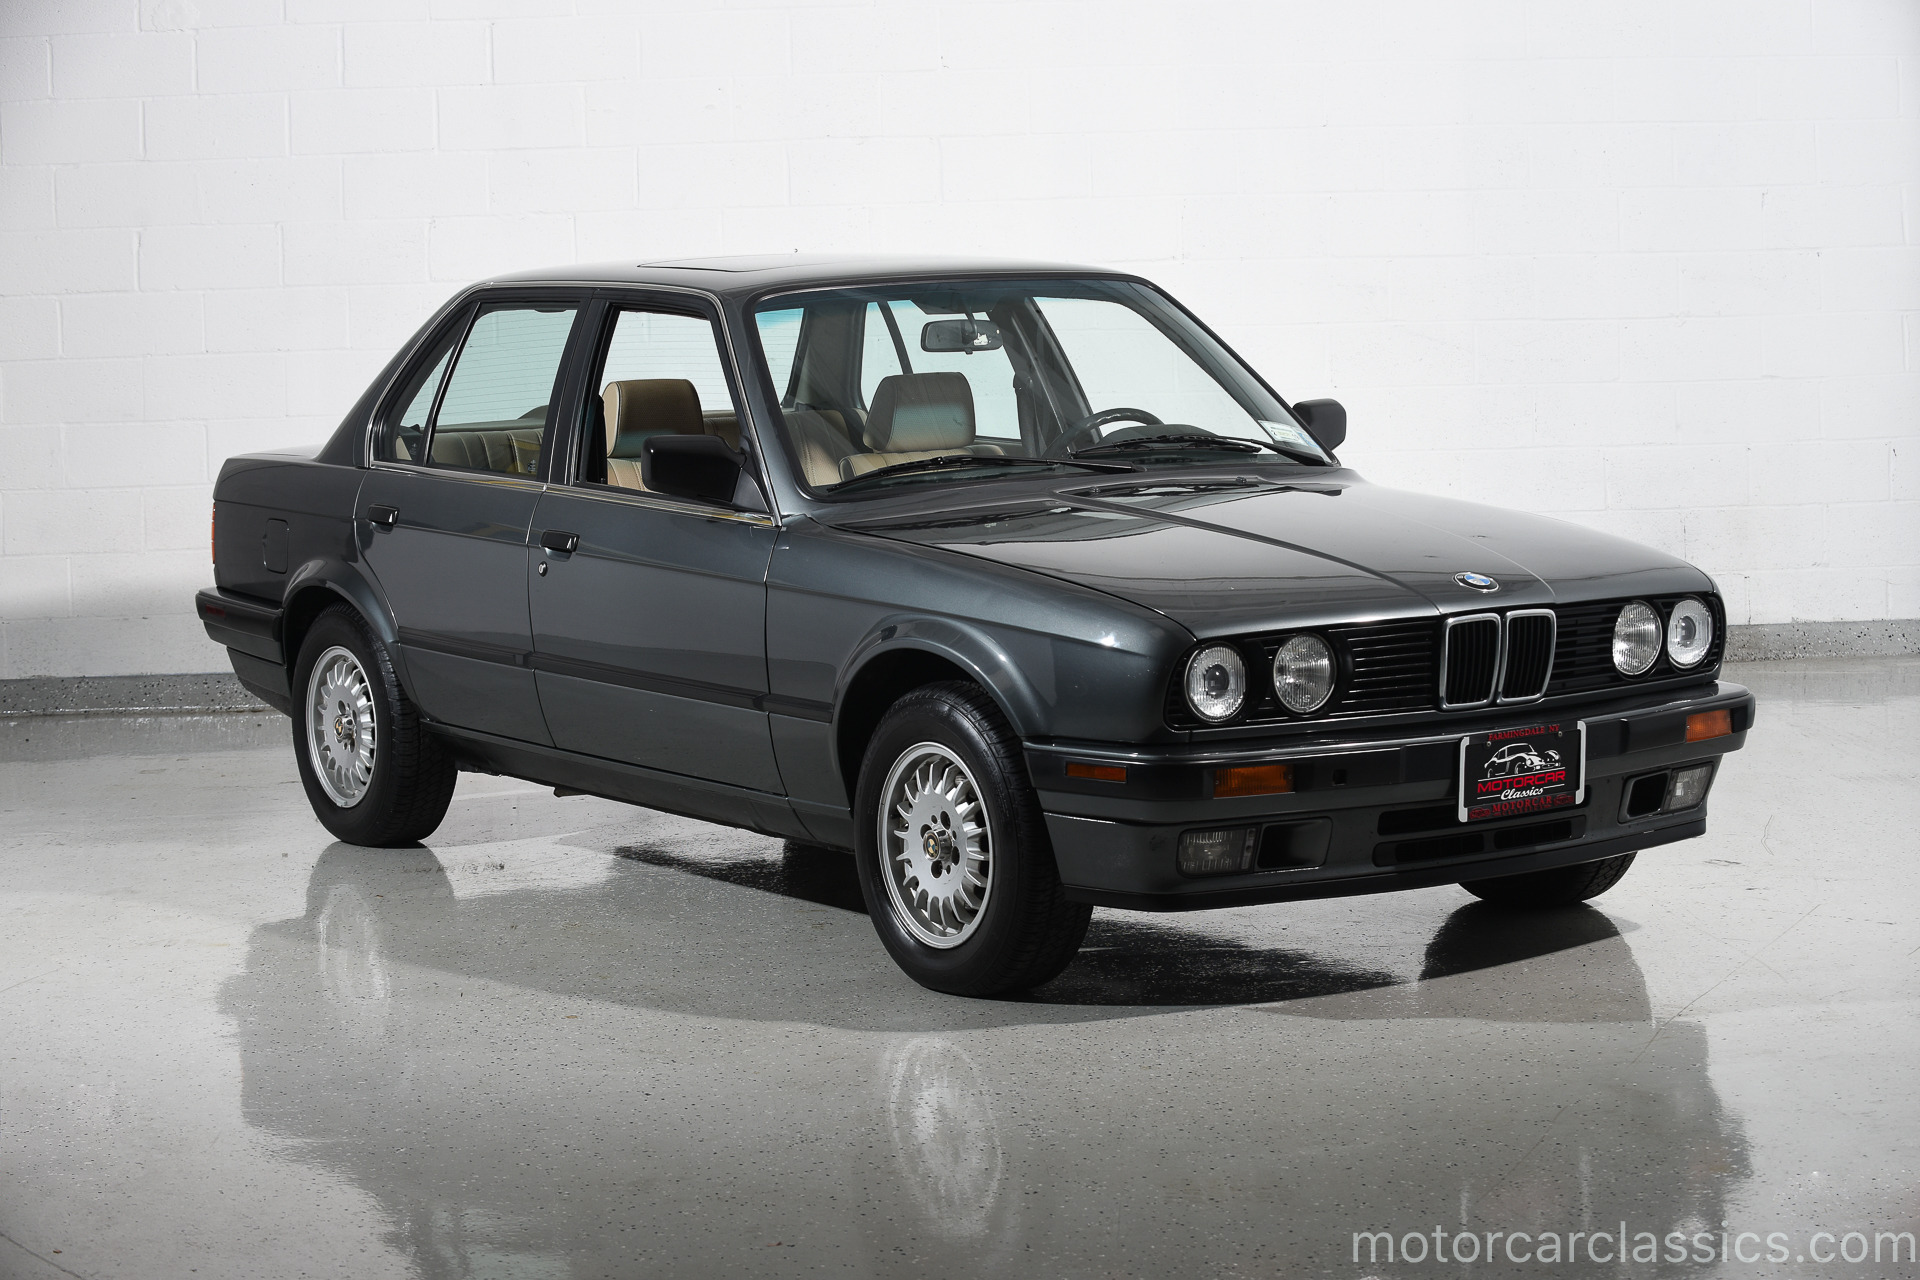 Echt niet Billy Goat vacature Used 1989 BMW 3 Series 325i For Sale ($9,900) | Motorcar Classics Stock #000